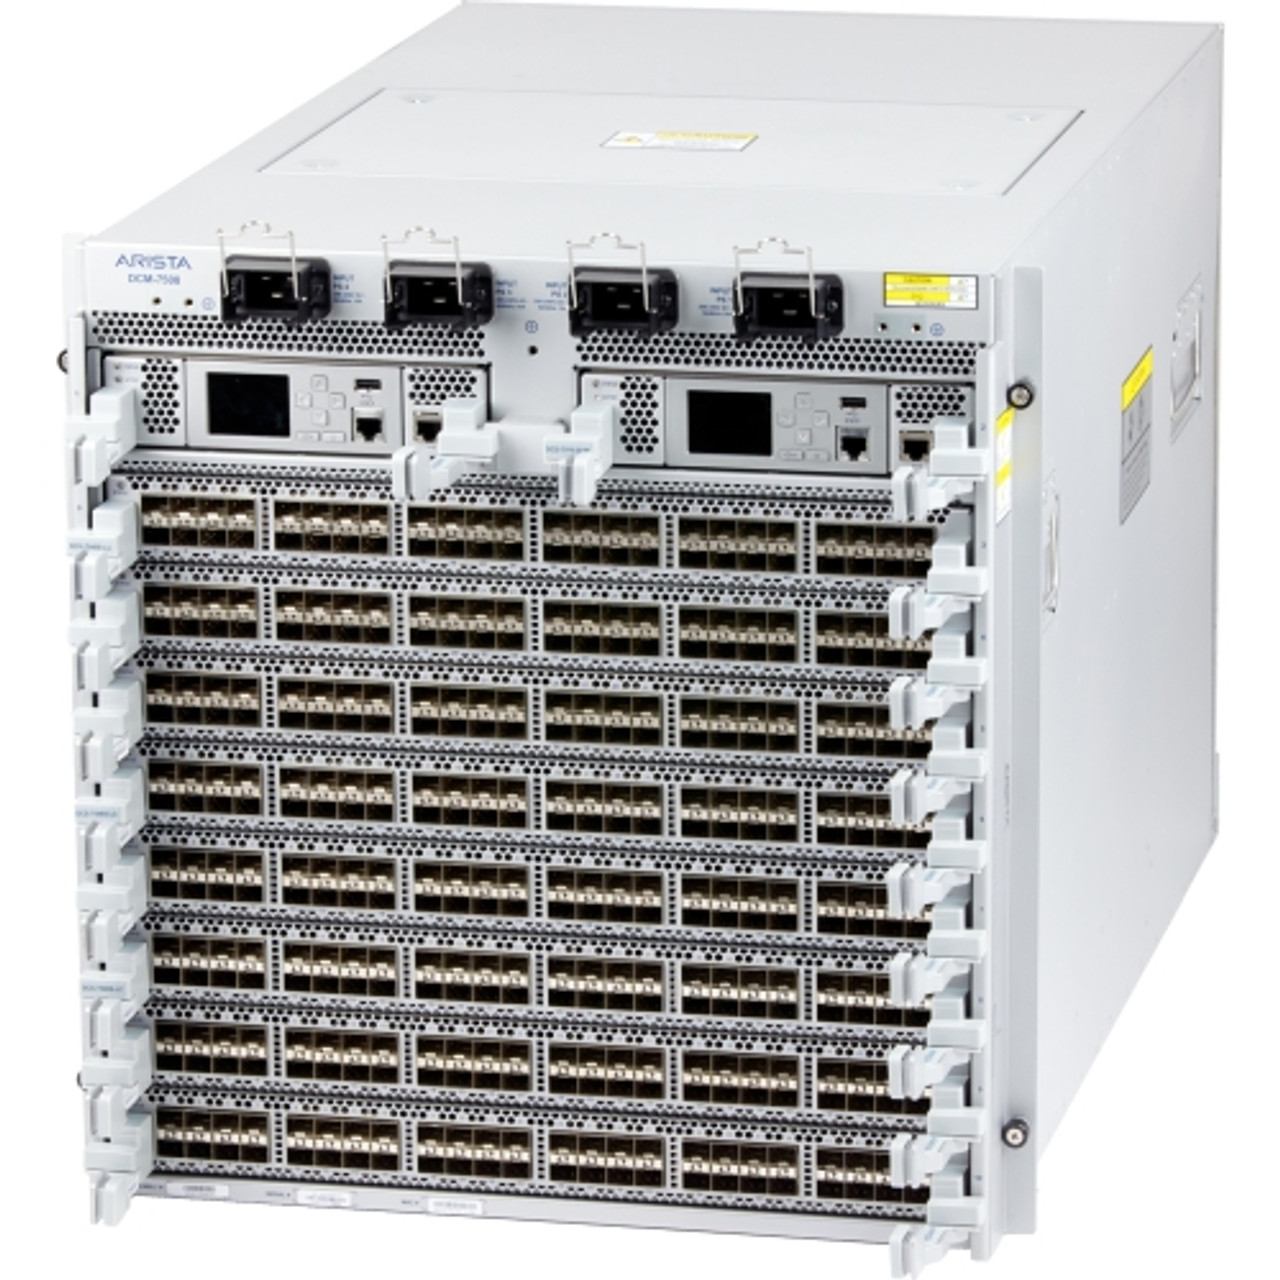 JH853A HP Arista 7508 Empty SWITCH Chassis Gigabit Ethernet 8 Expansion Slot SFP Manageable Modular Rack Mountable (Refurbished)